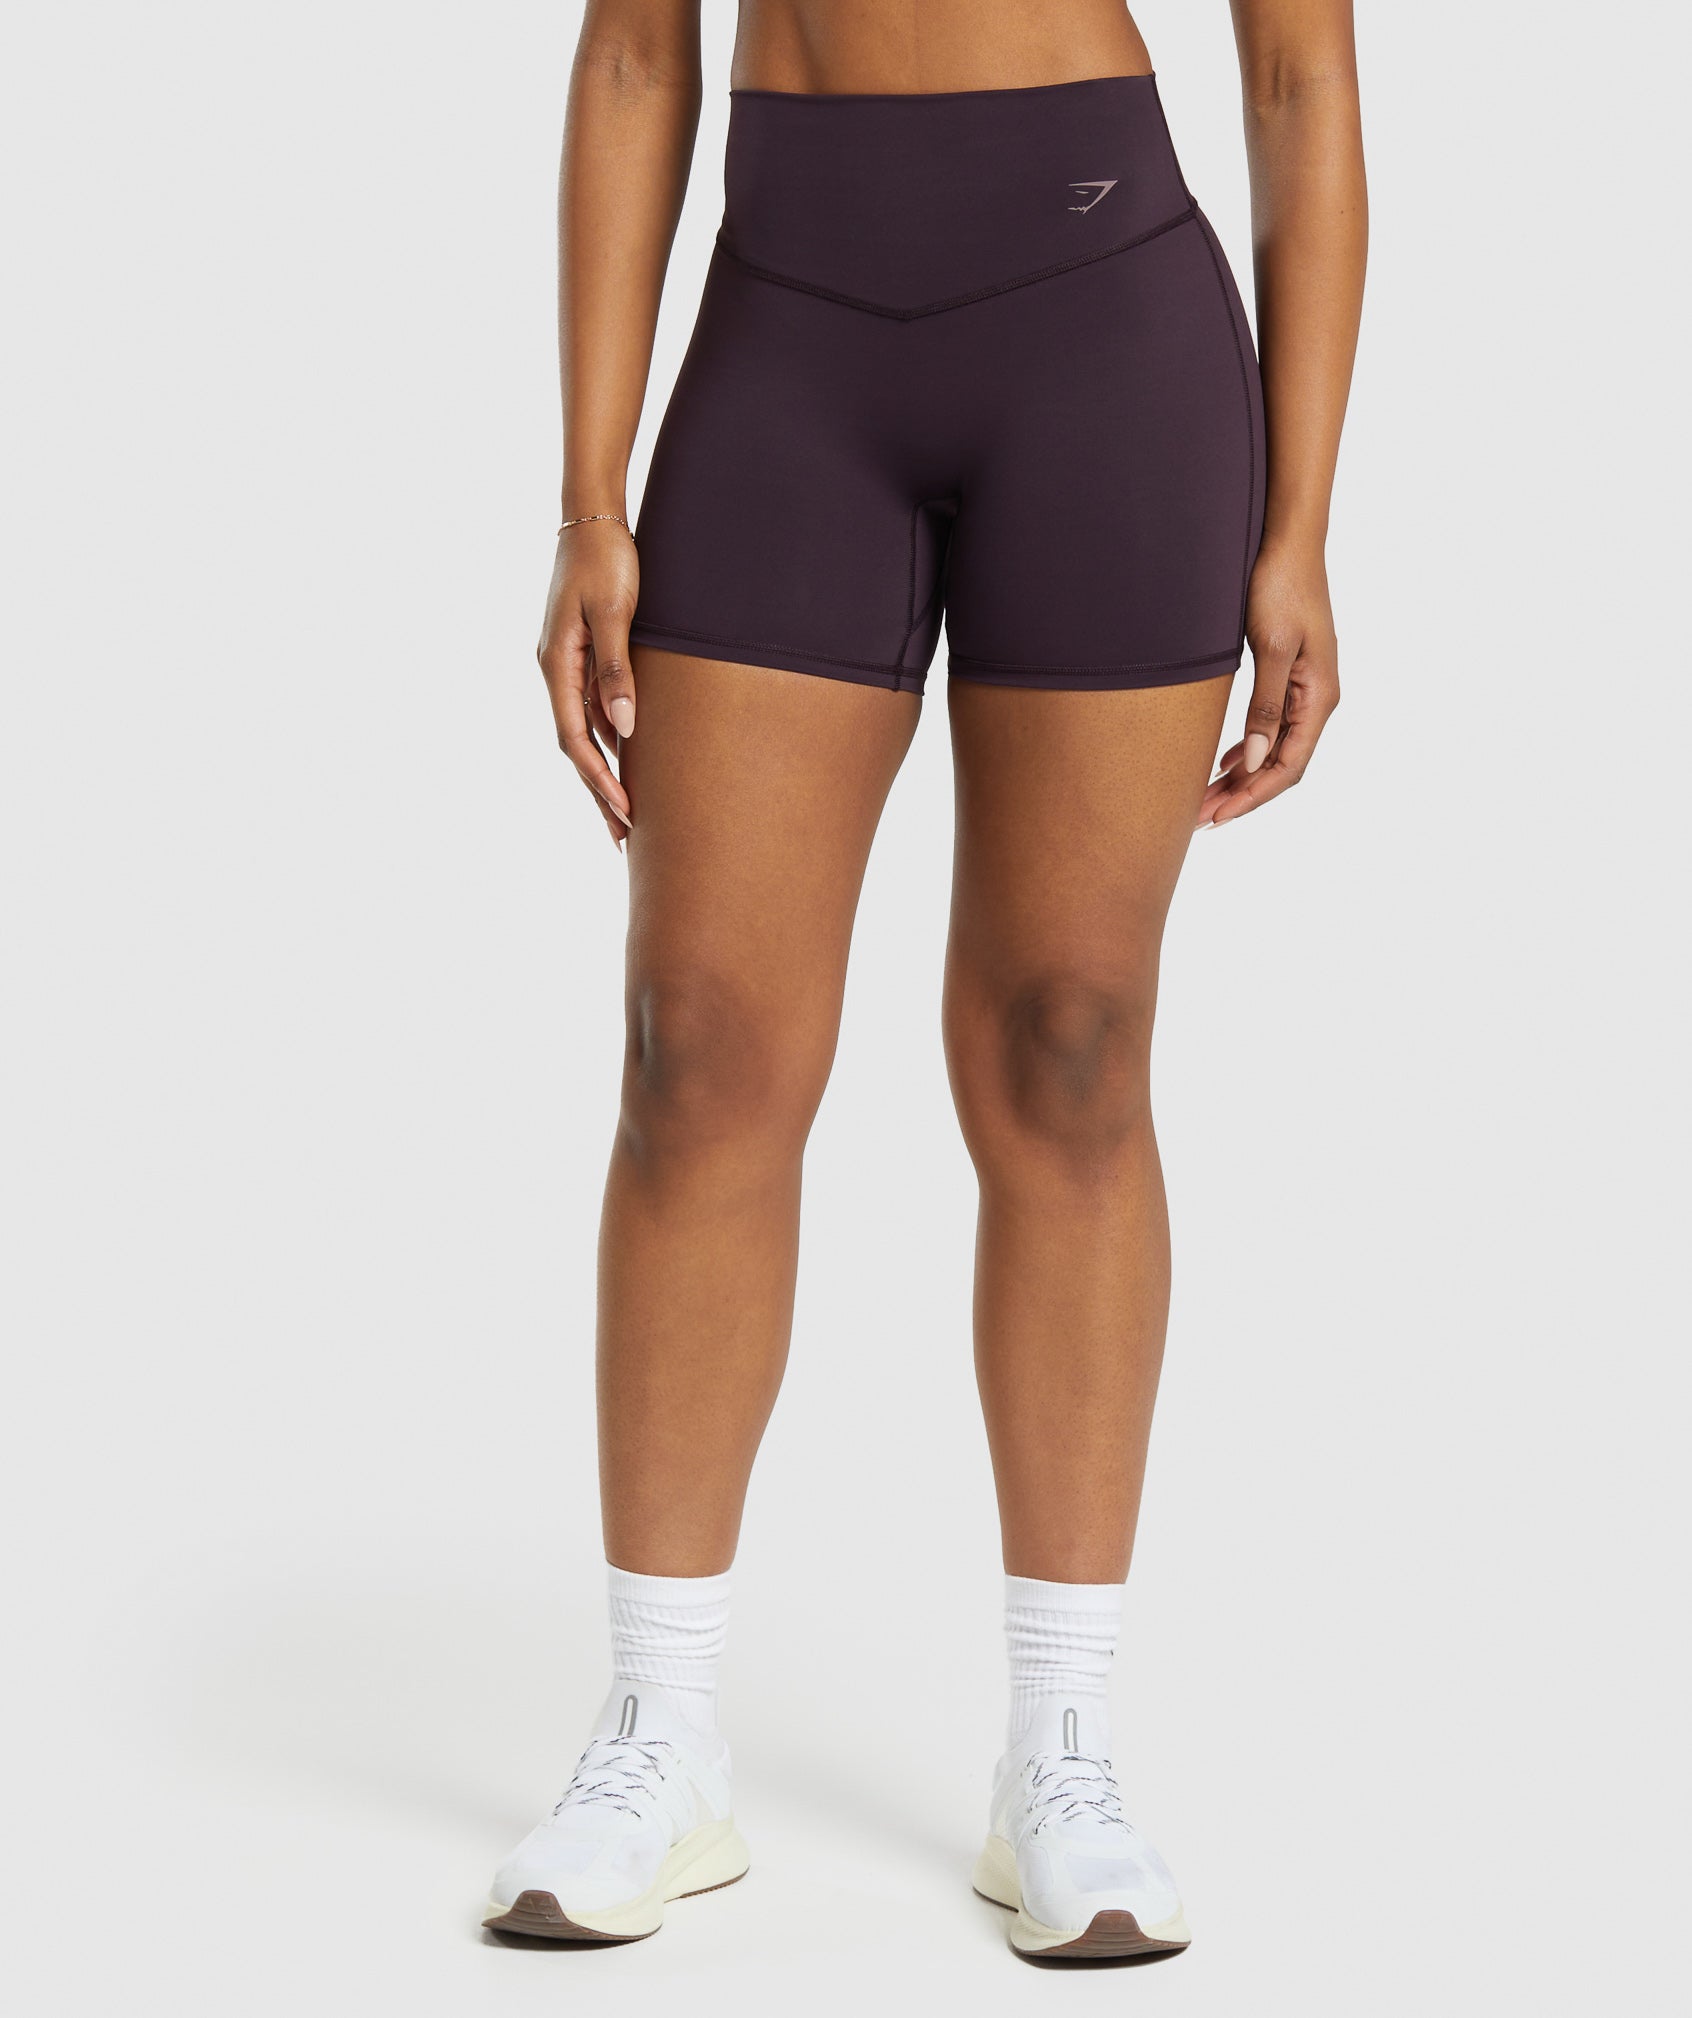 Elevate Shorts in Plum Brown - view 1